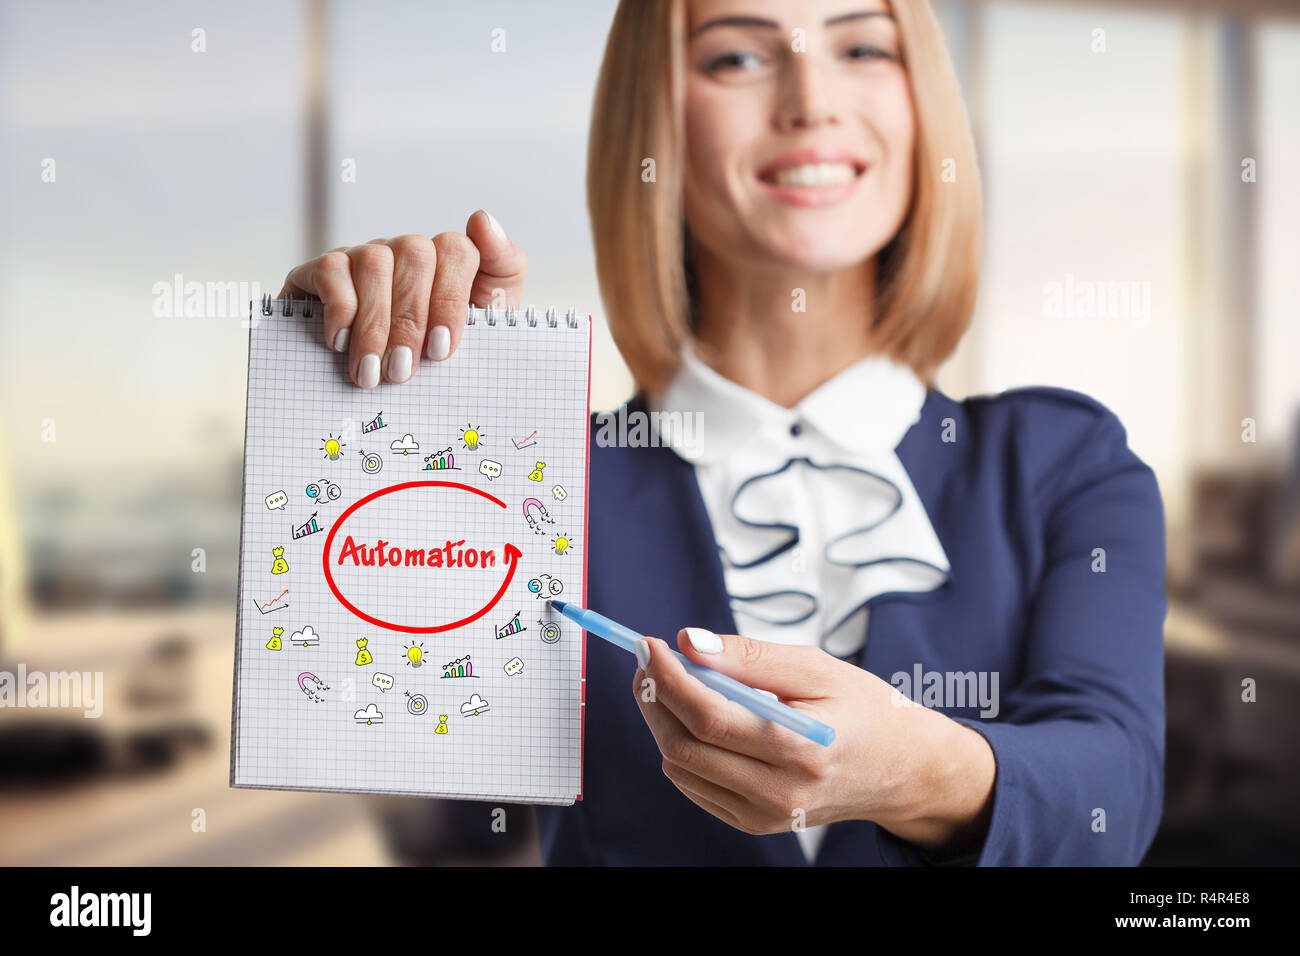 Business, technology, internet and networking concept. Young successful entrepreneur in the work process. Automation Stock Photo